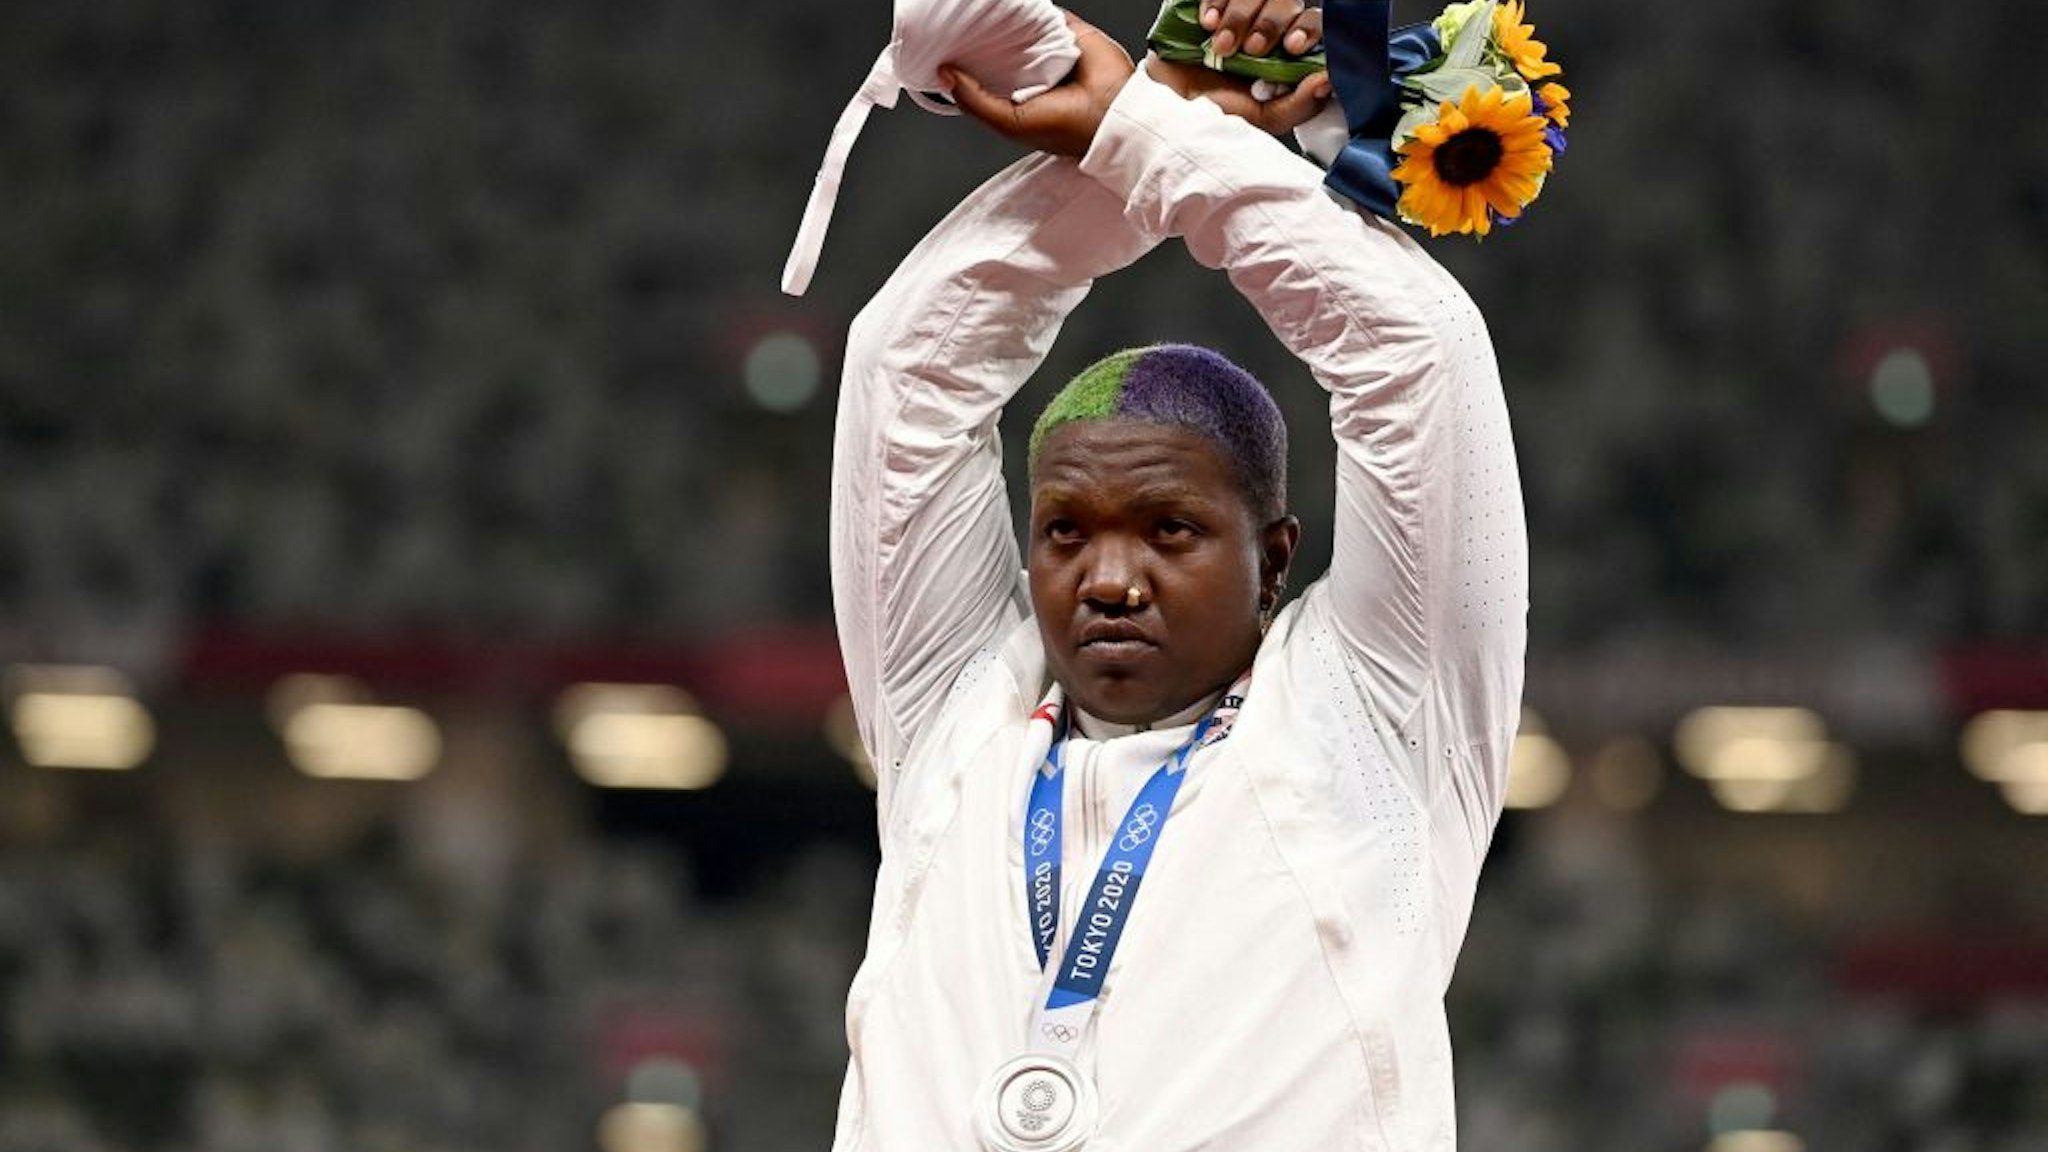 TOPSHOT - Second-placed USA's Raven Saunders gestures on the podium with her silver medal after competing the women's shot put event during the Tokyo 2020 Olympic Games at the Olympic Stadium in Tokyo on August 1, 2021. (Photo by Ina FASSBENDER / AFP) (Photo by INA FASSBENDER/AFP via Getty Images)